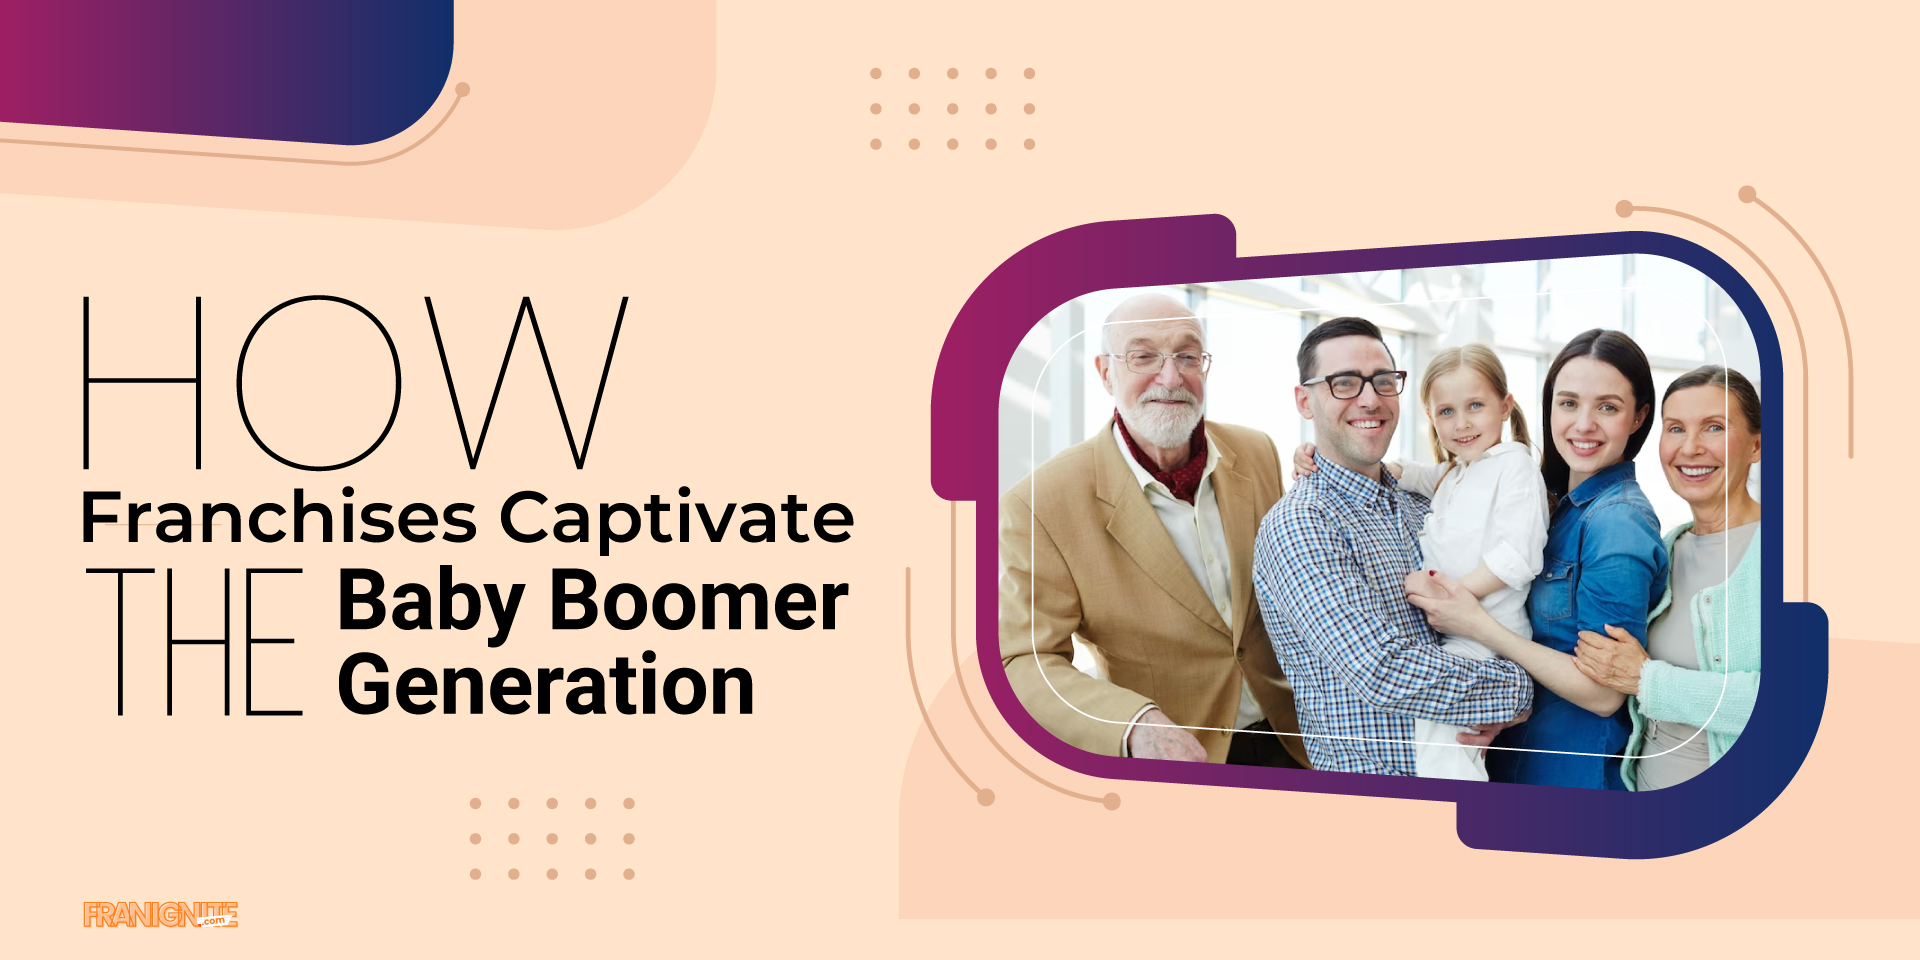 How Franchises Captivate the Baby Boomer Generation